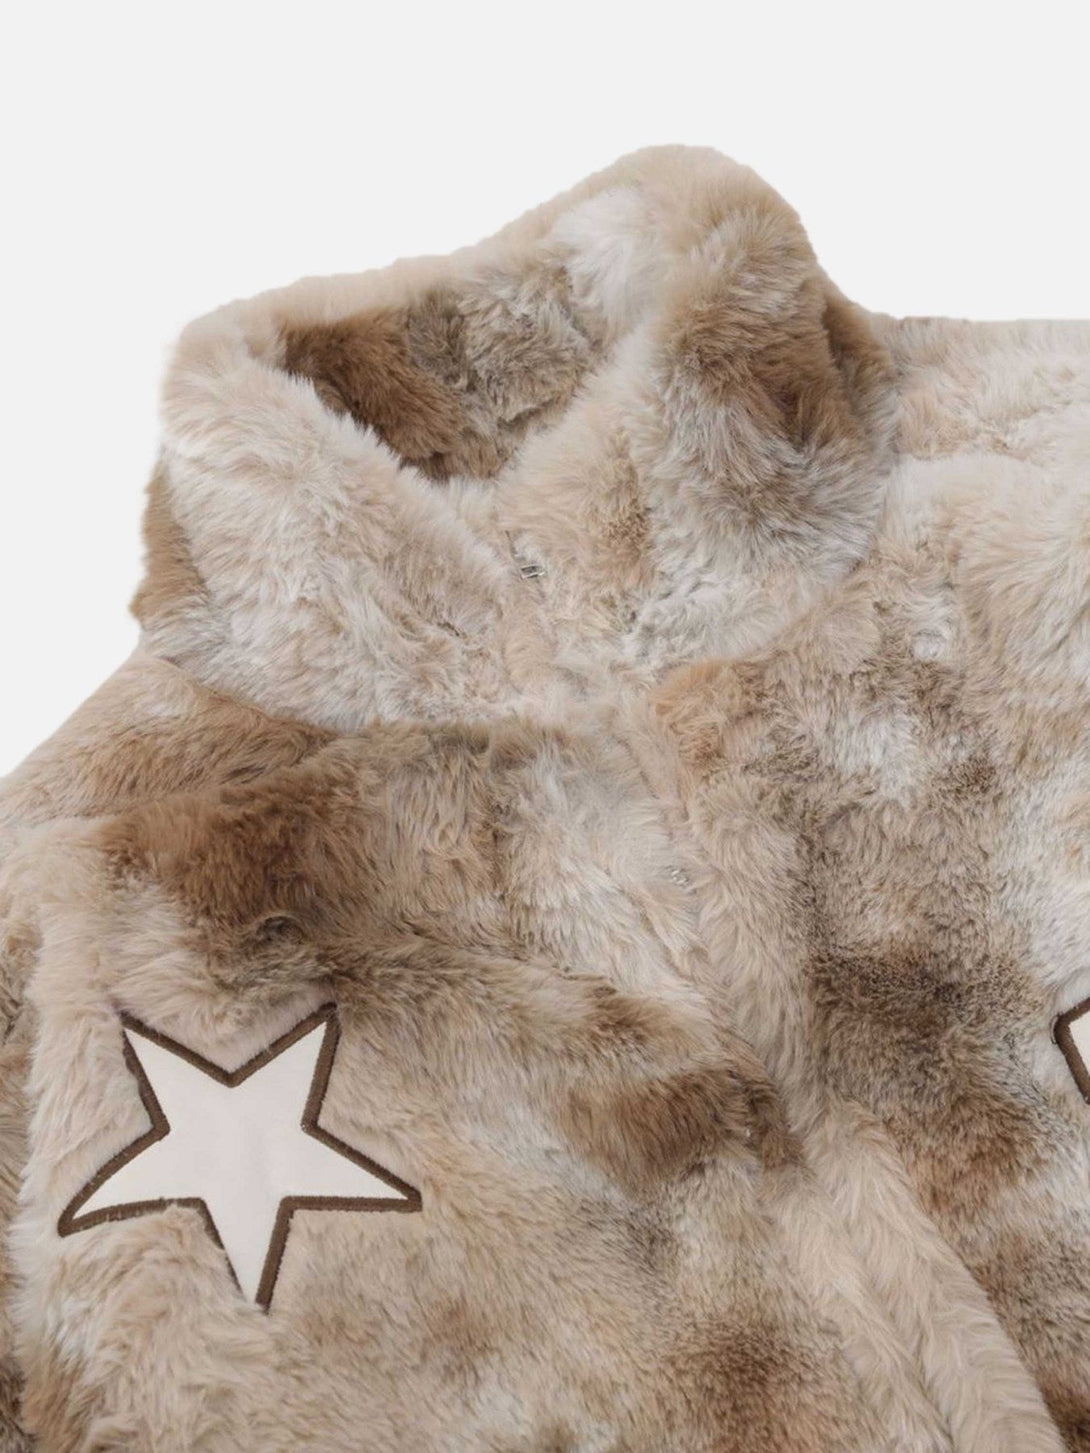 Majesda® - Embroidered Star Lambswool Jacket - 1798- Outfit Ideas - Streetwear Fashion - majesda.com